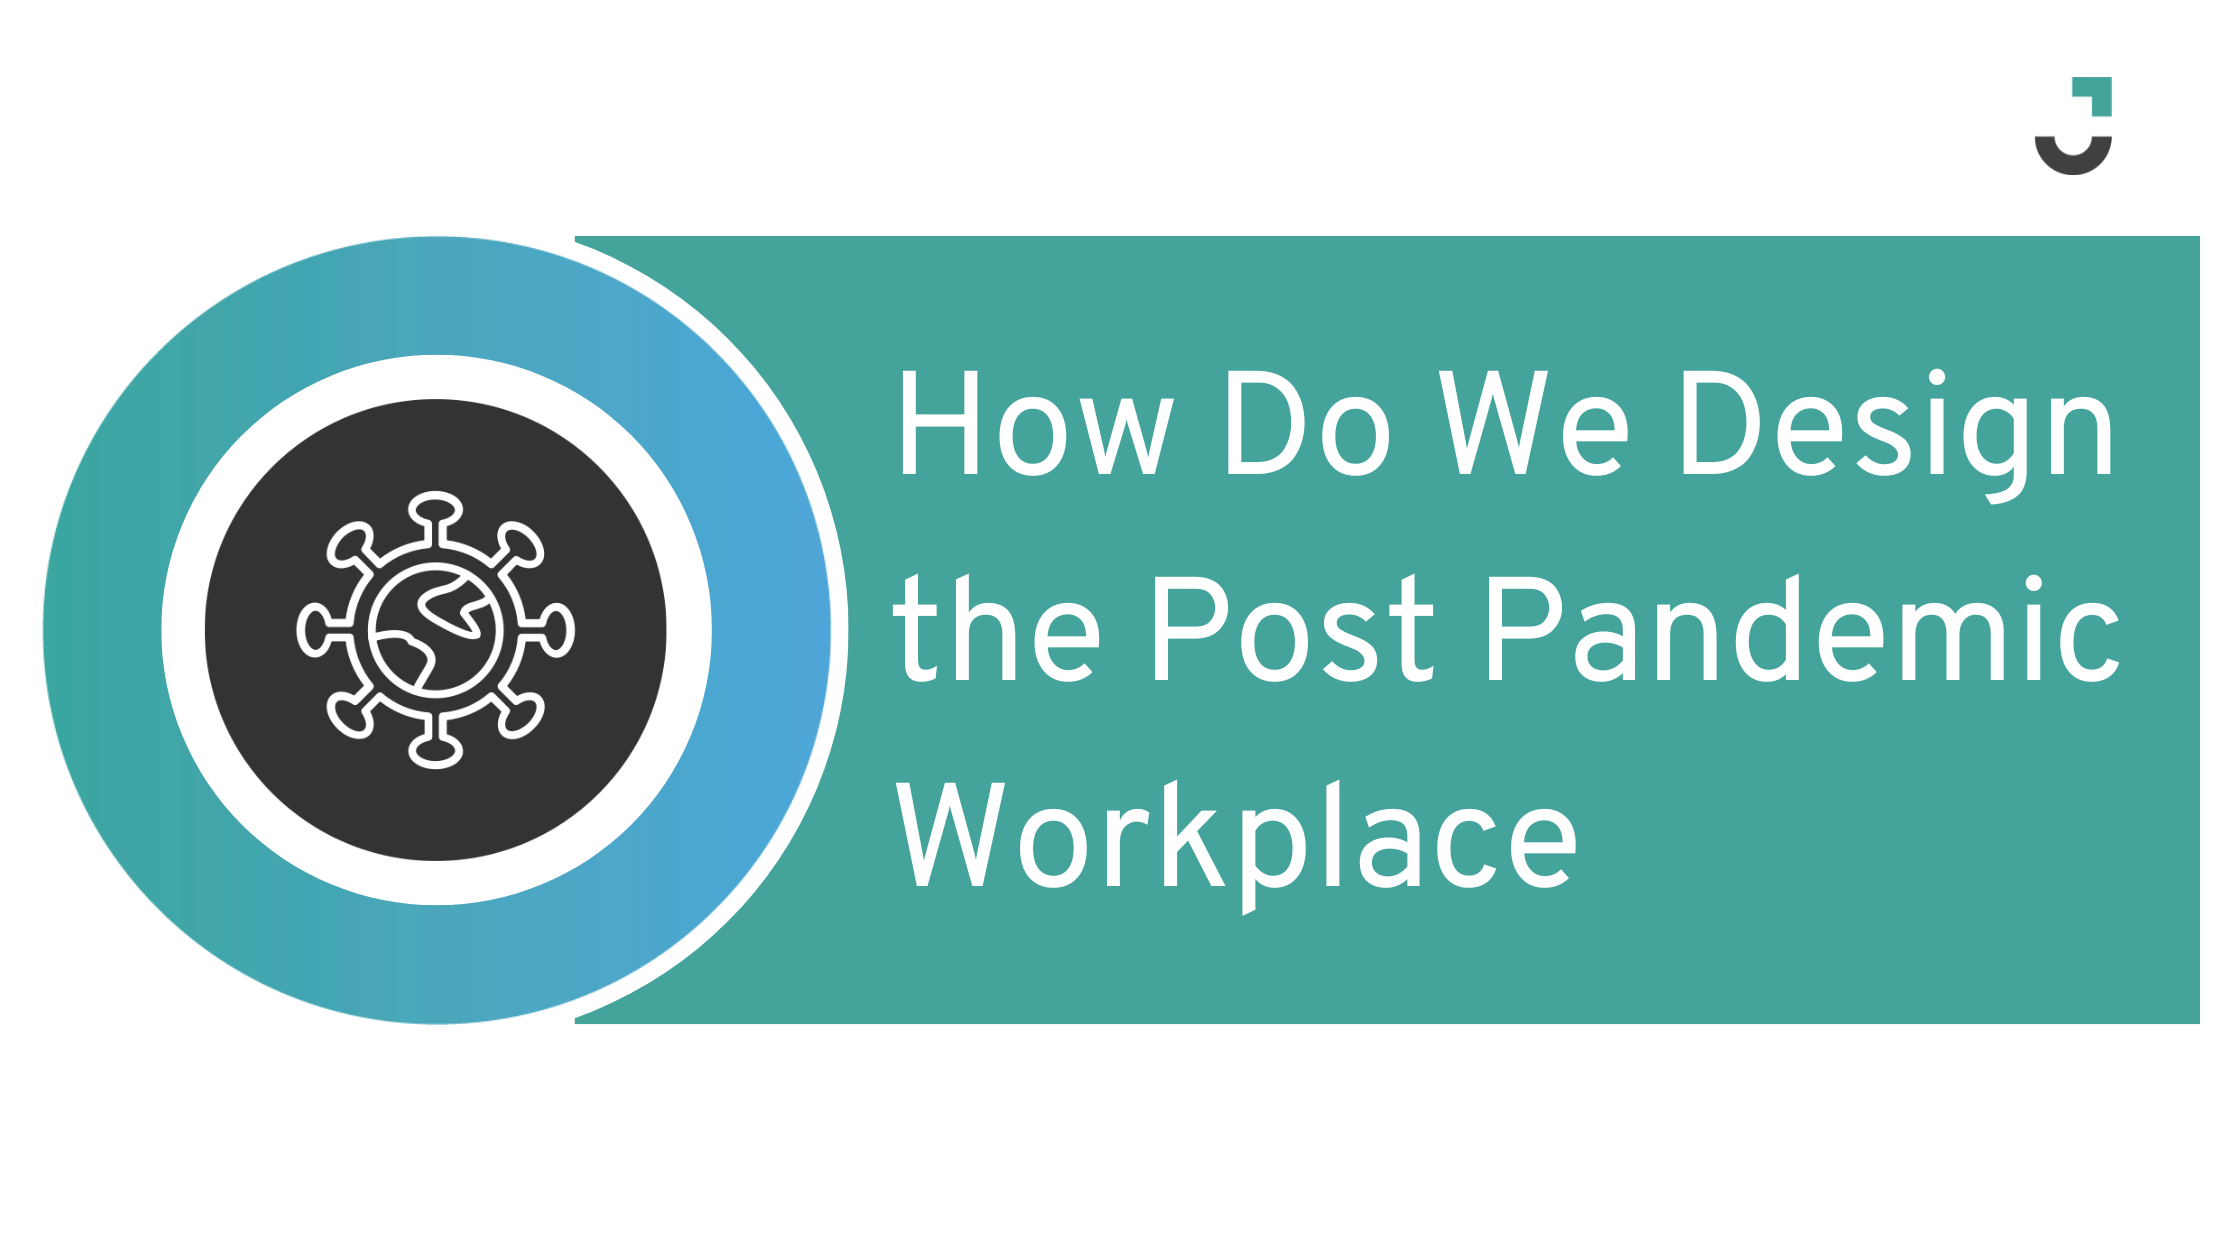 How Do We Design the Post Pandemic Workplace